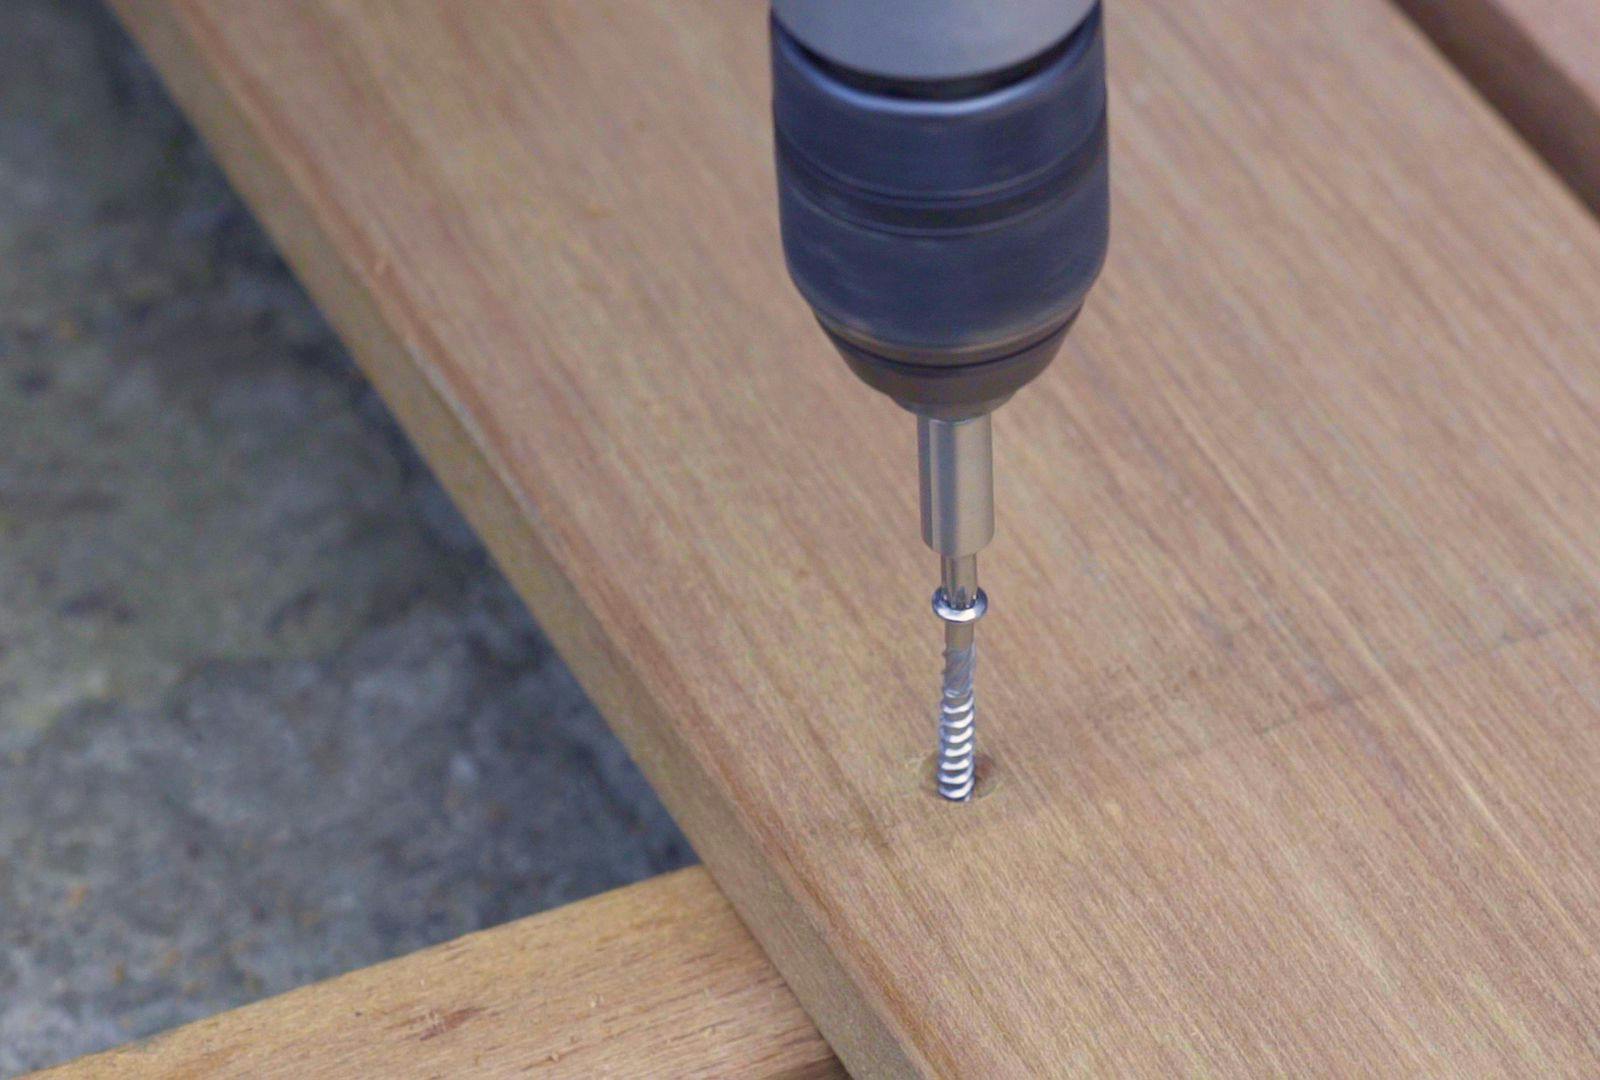 Which deck screw do I need?